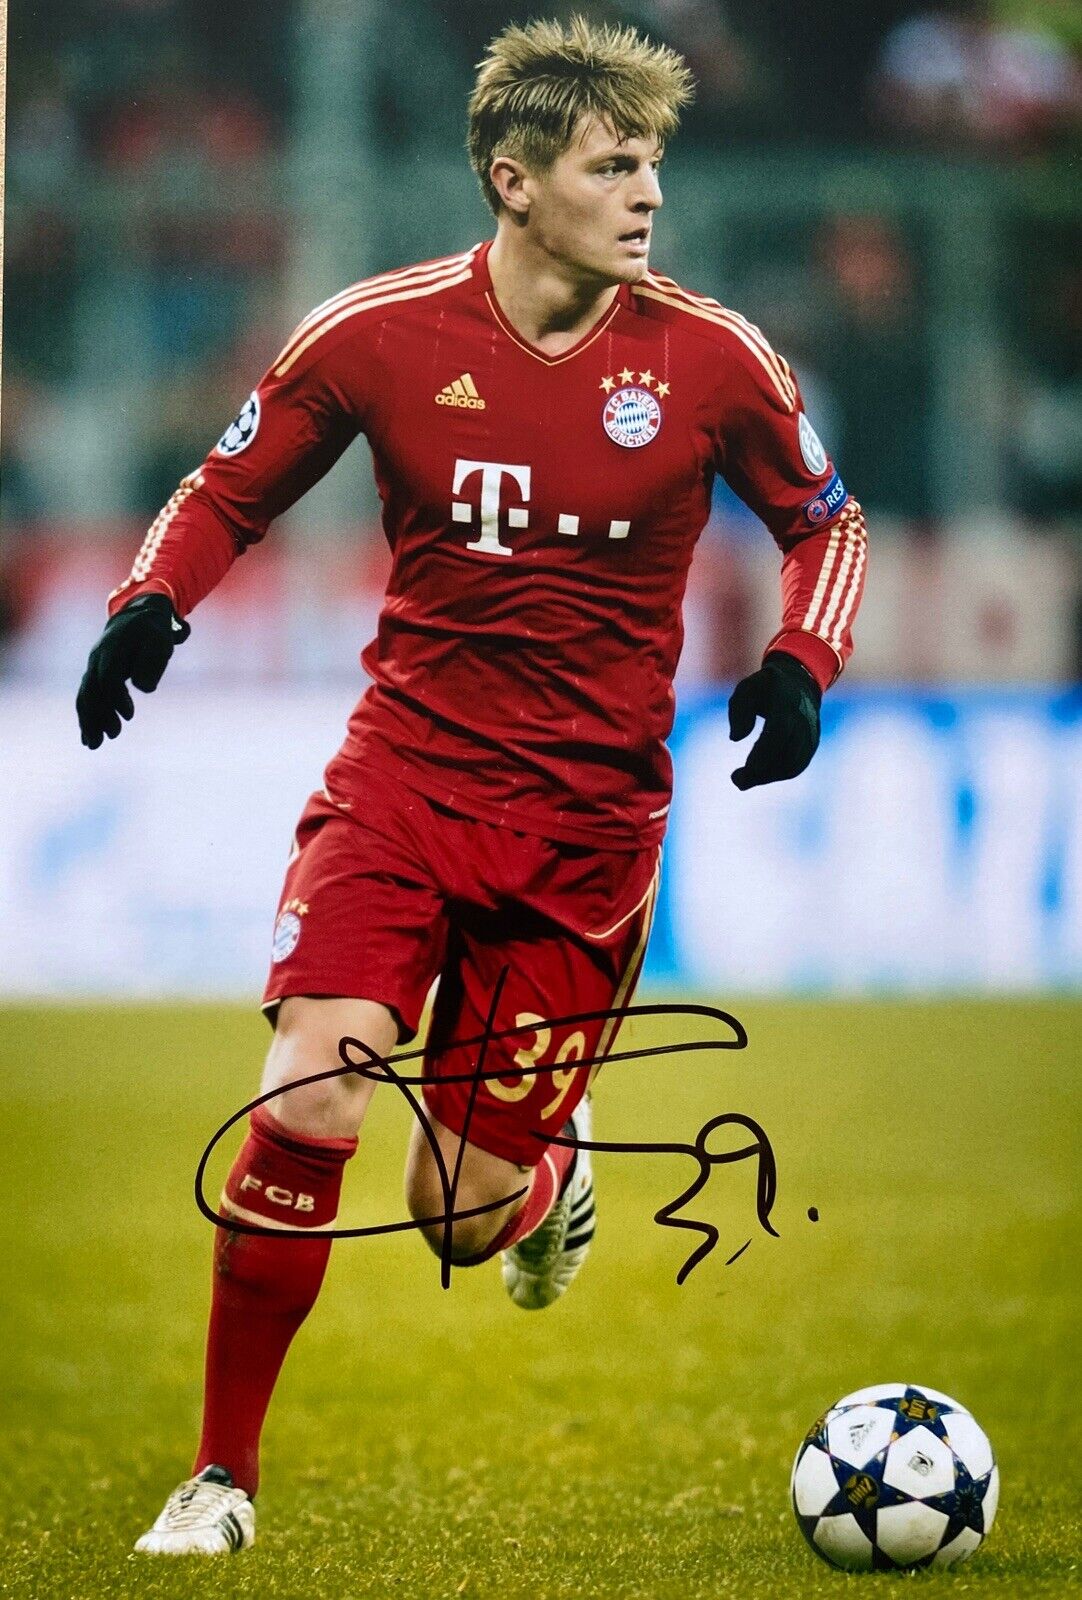 Toni Kroos Genuine Hand Signed 12x8 Bayern Munich Photo Poster painting, Real Madrid, Germany